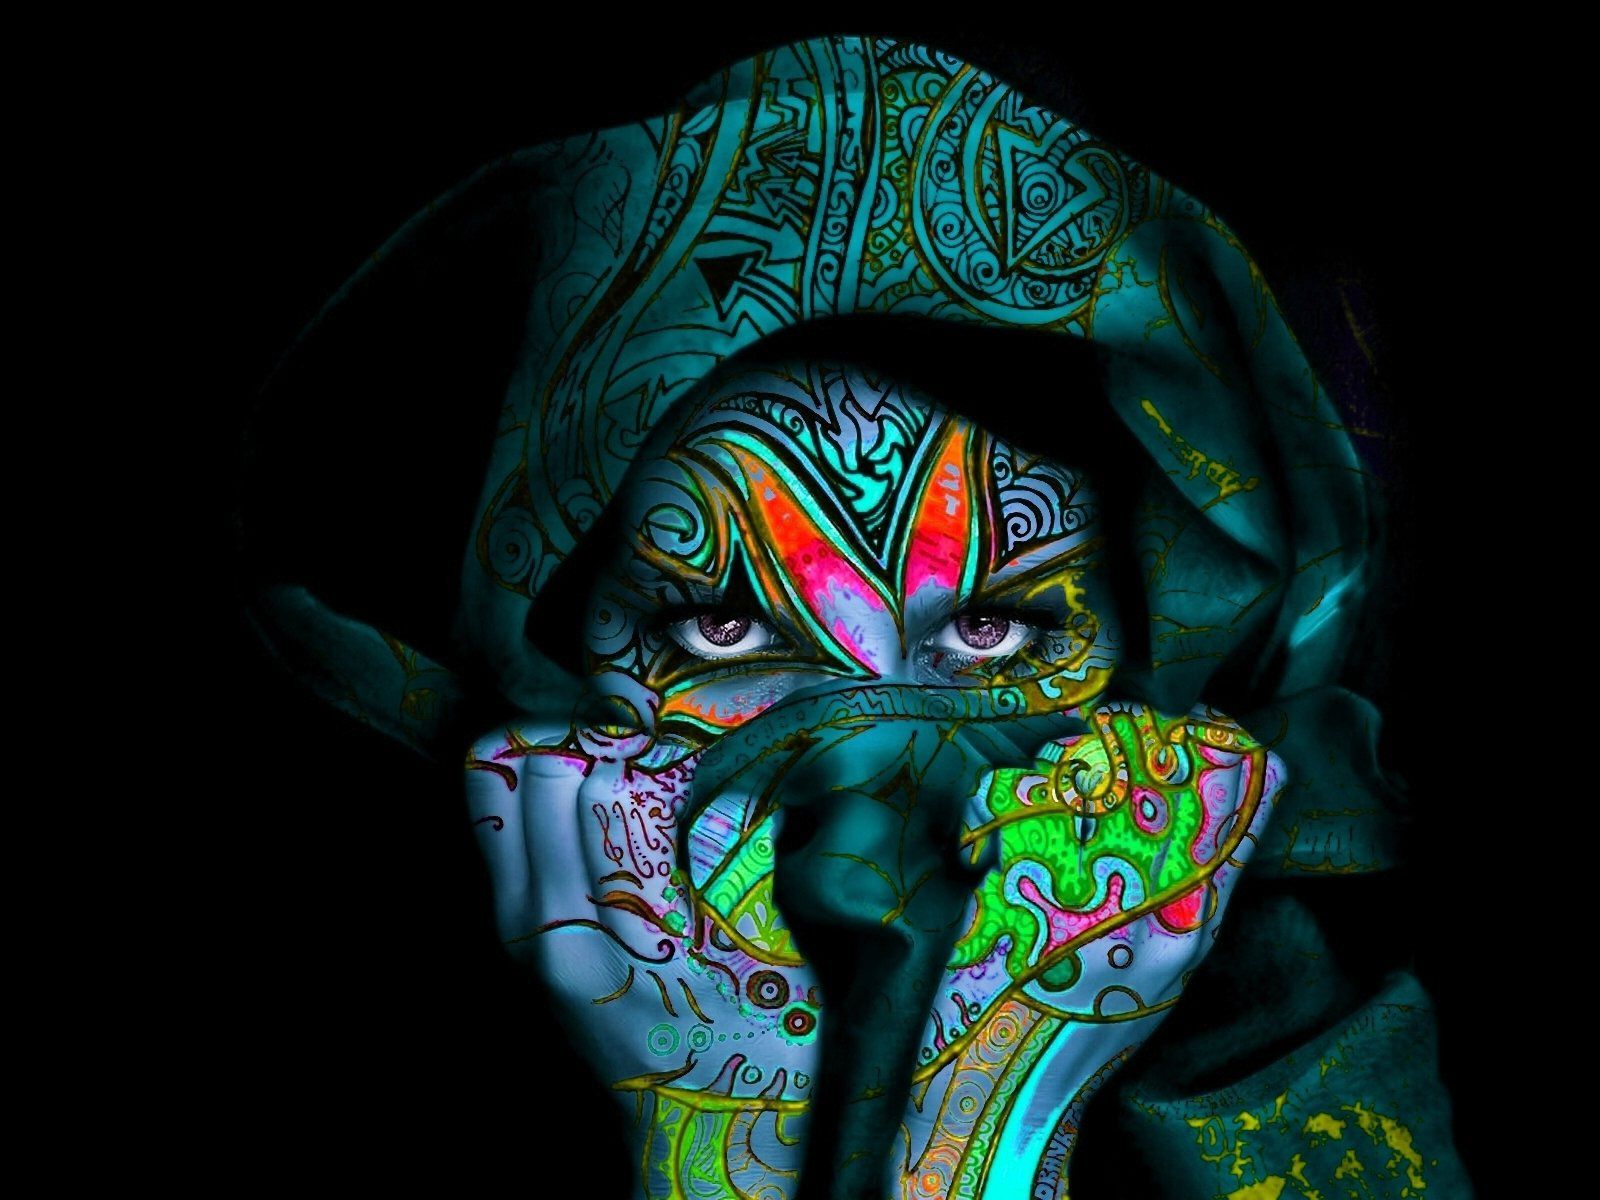 Neon Mystique compo 01 Wallpaper and Background Imagex1200